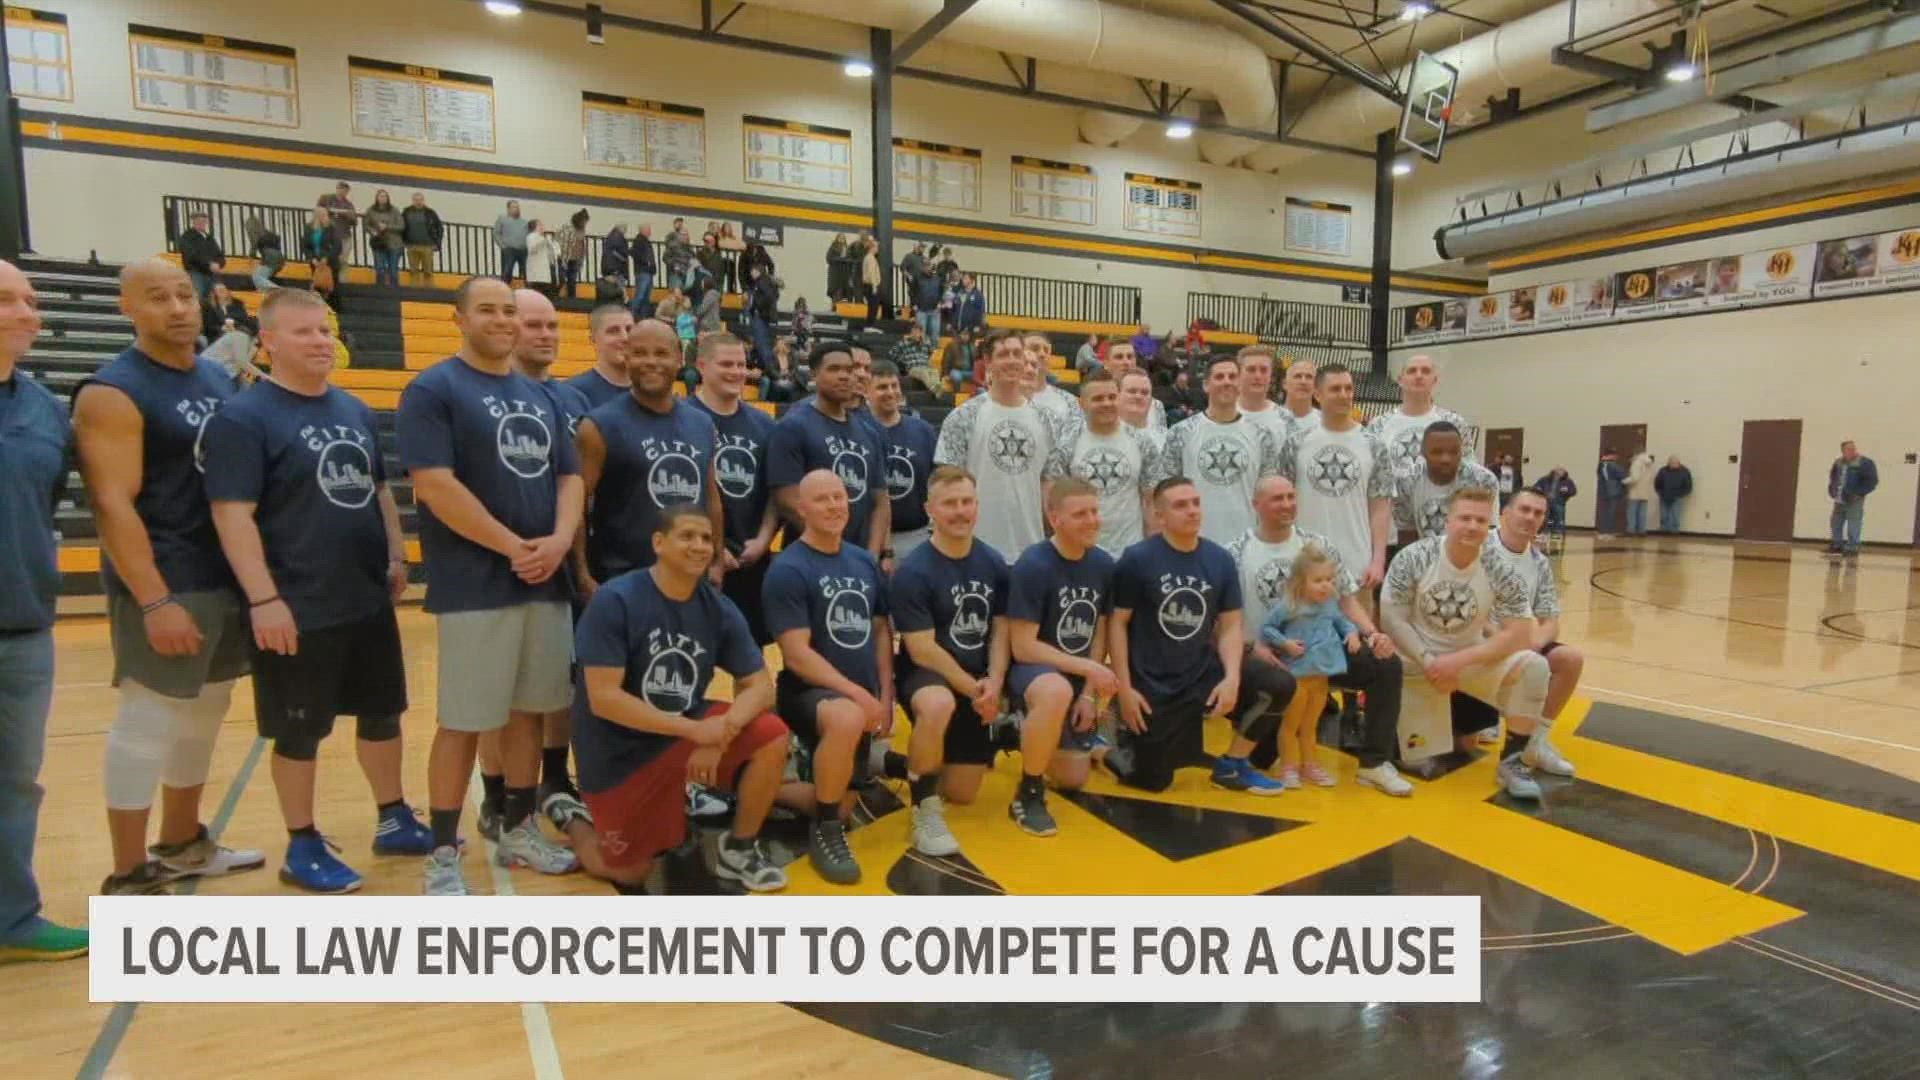 The game started in 2002 as a way to raise money for the family of retired law enforcement officials.